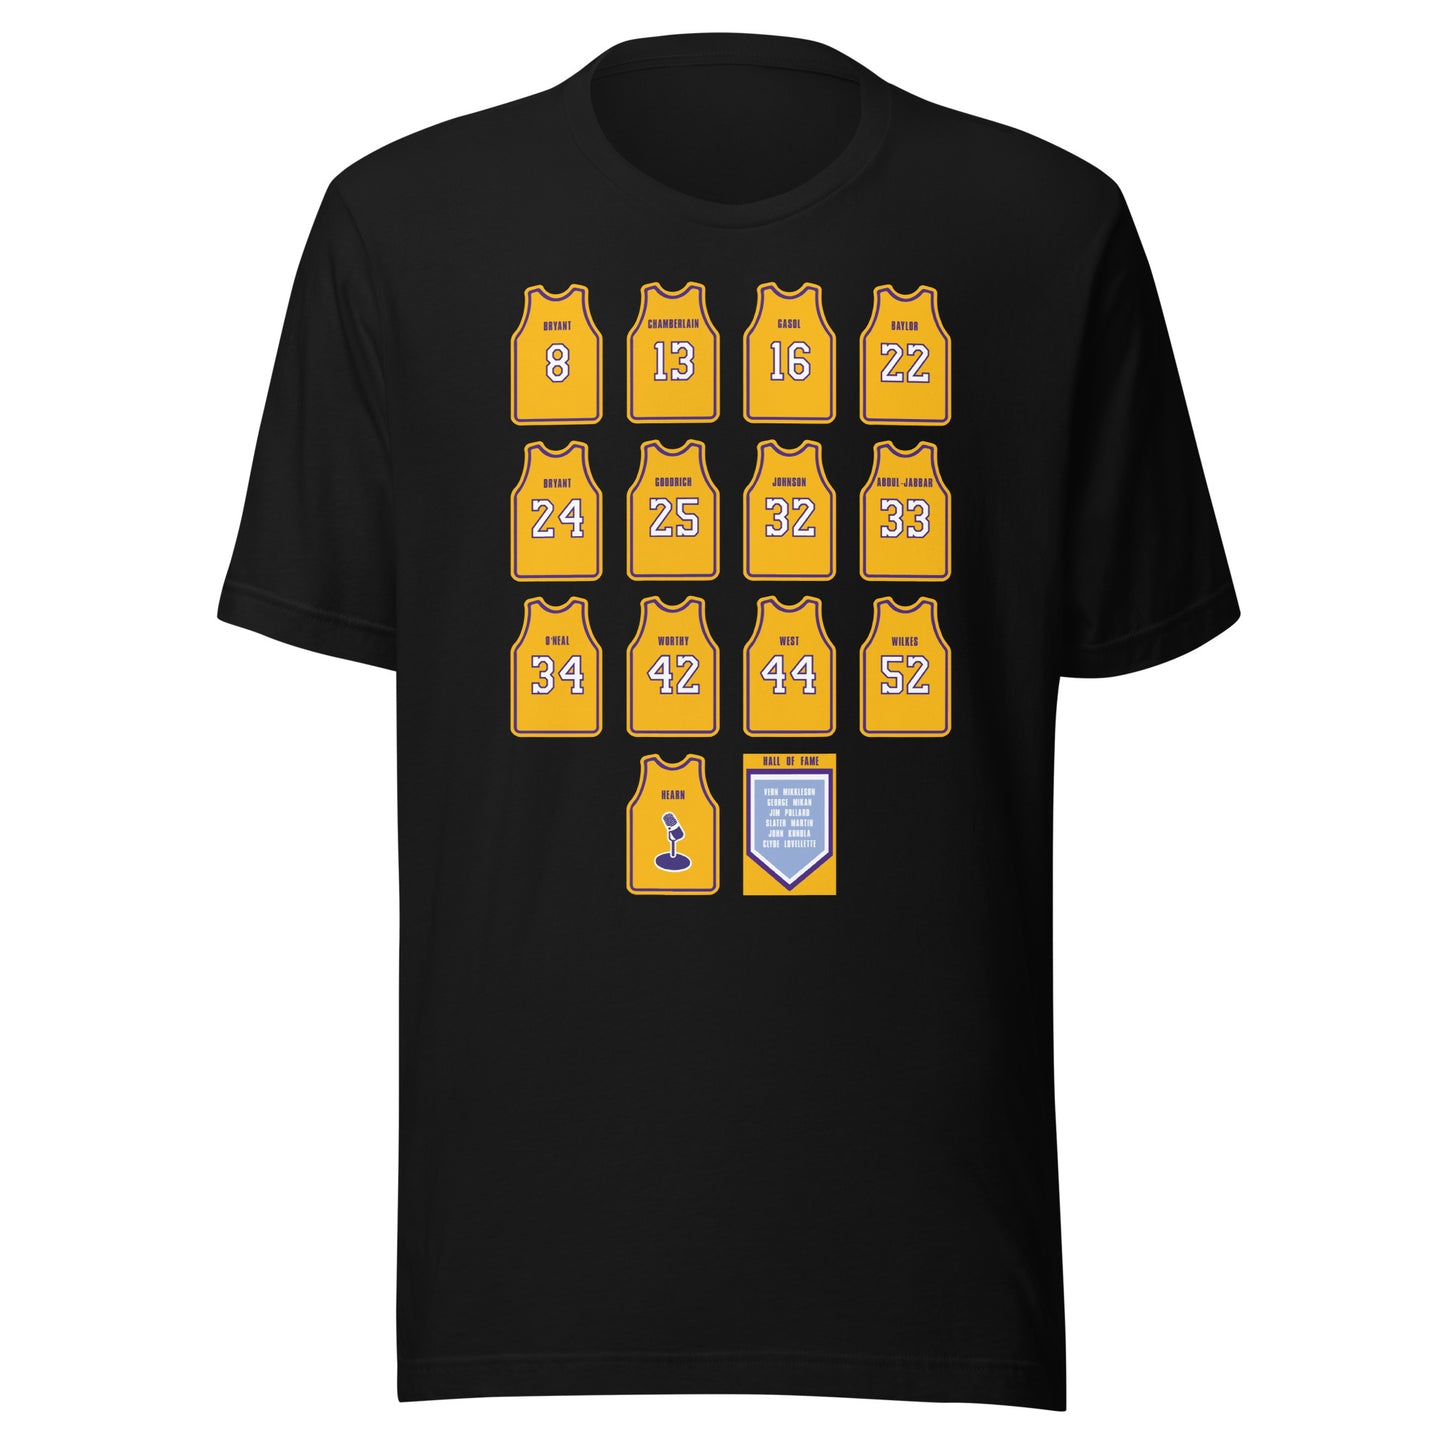 Los Angeles Lakers Retired Jerseys Illustrated Graphic Tee